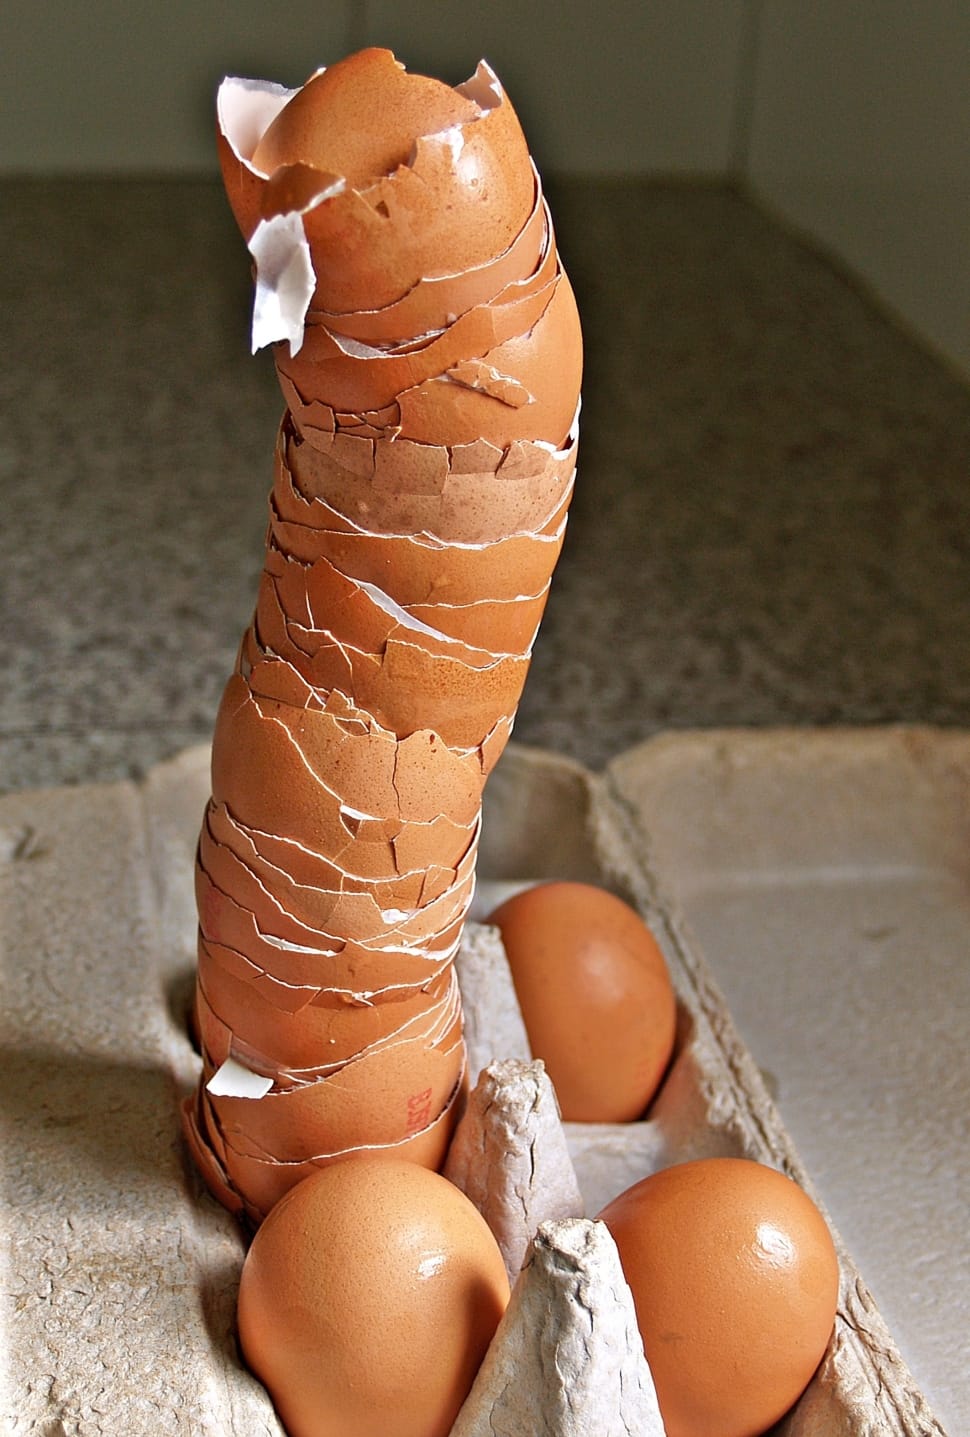 brown egg shells and 3 eggs preview